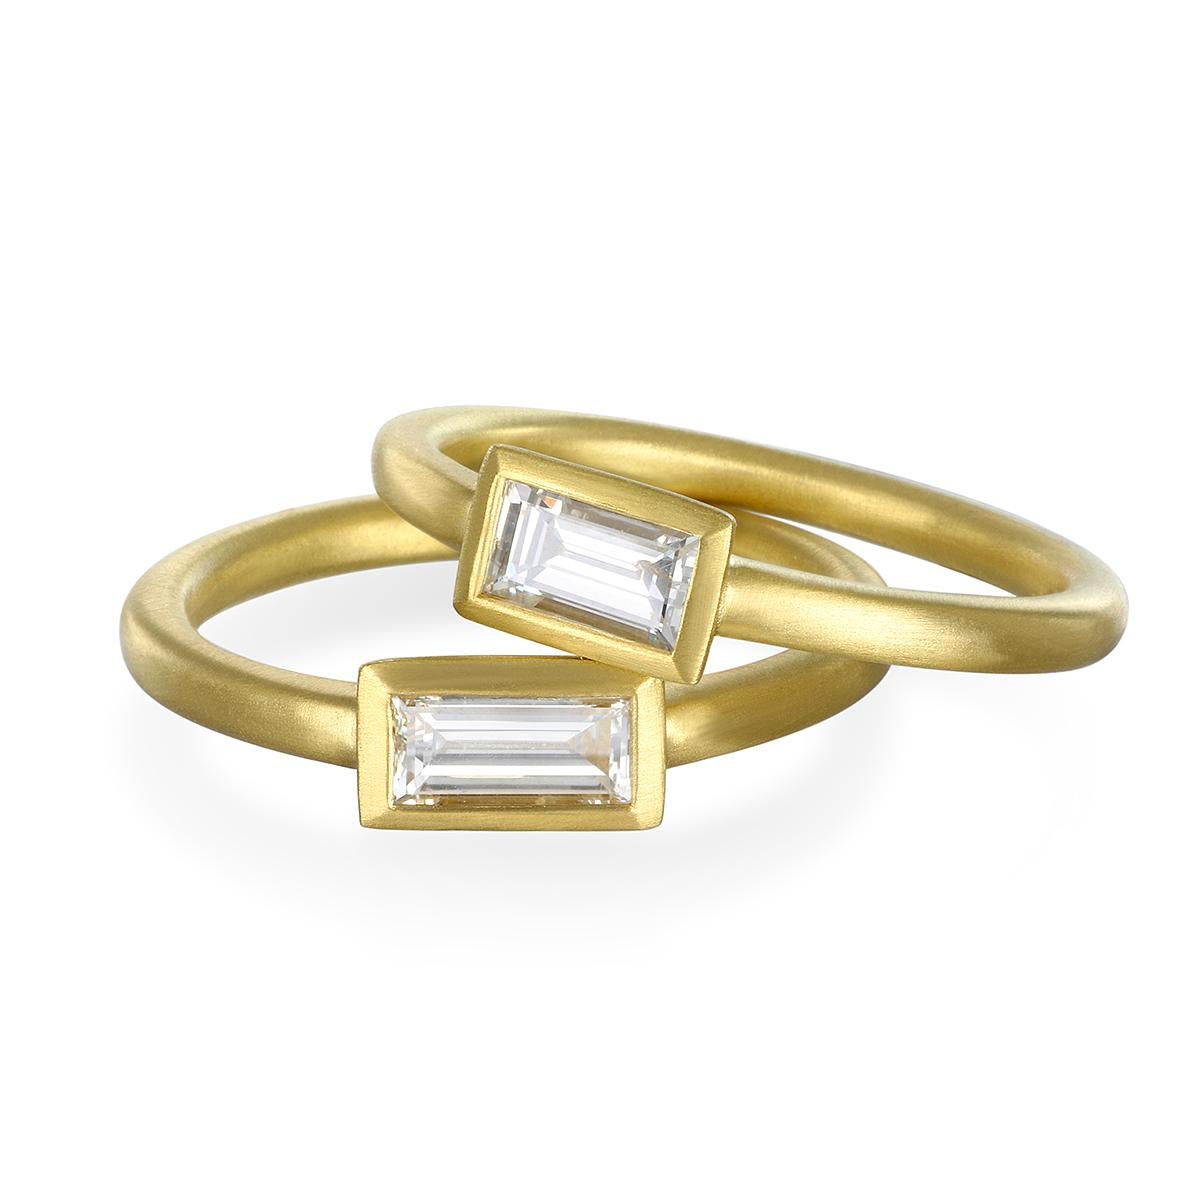 The newest additions to Faye Kim's signature stack rings, diamond baguettes are bezel set in 18k gold* for a clean, contemporary style that can be worn alone or stacked to create your own unique style. Matte-finished.

*In Faye Kim's signature 18k